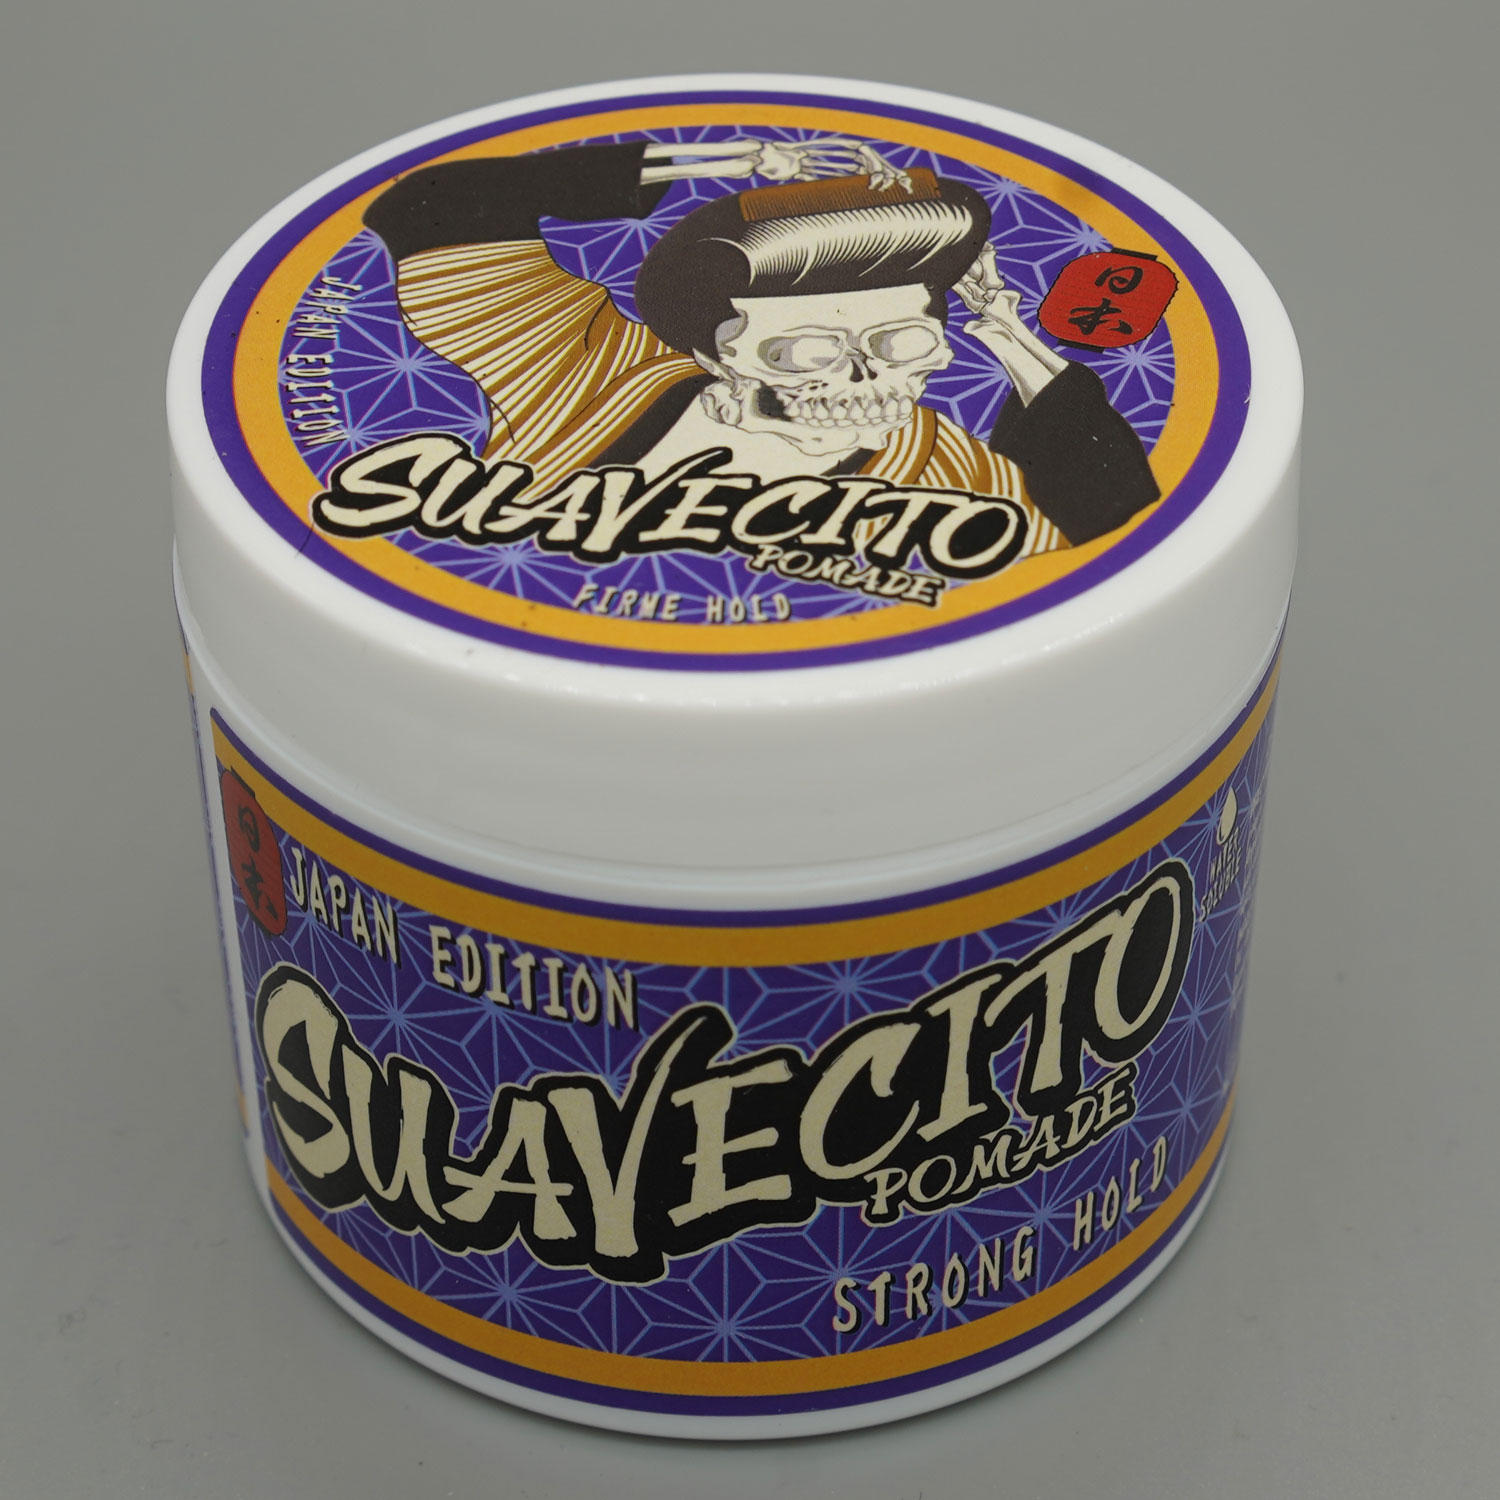 Suavecito Firme(Strong ) Pomade Japanese Edition 日本限定版 